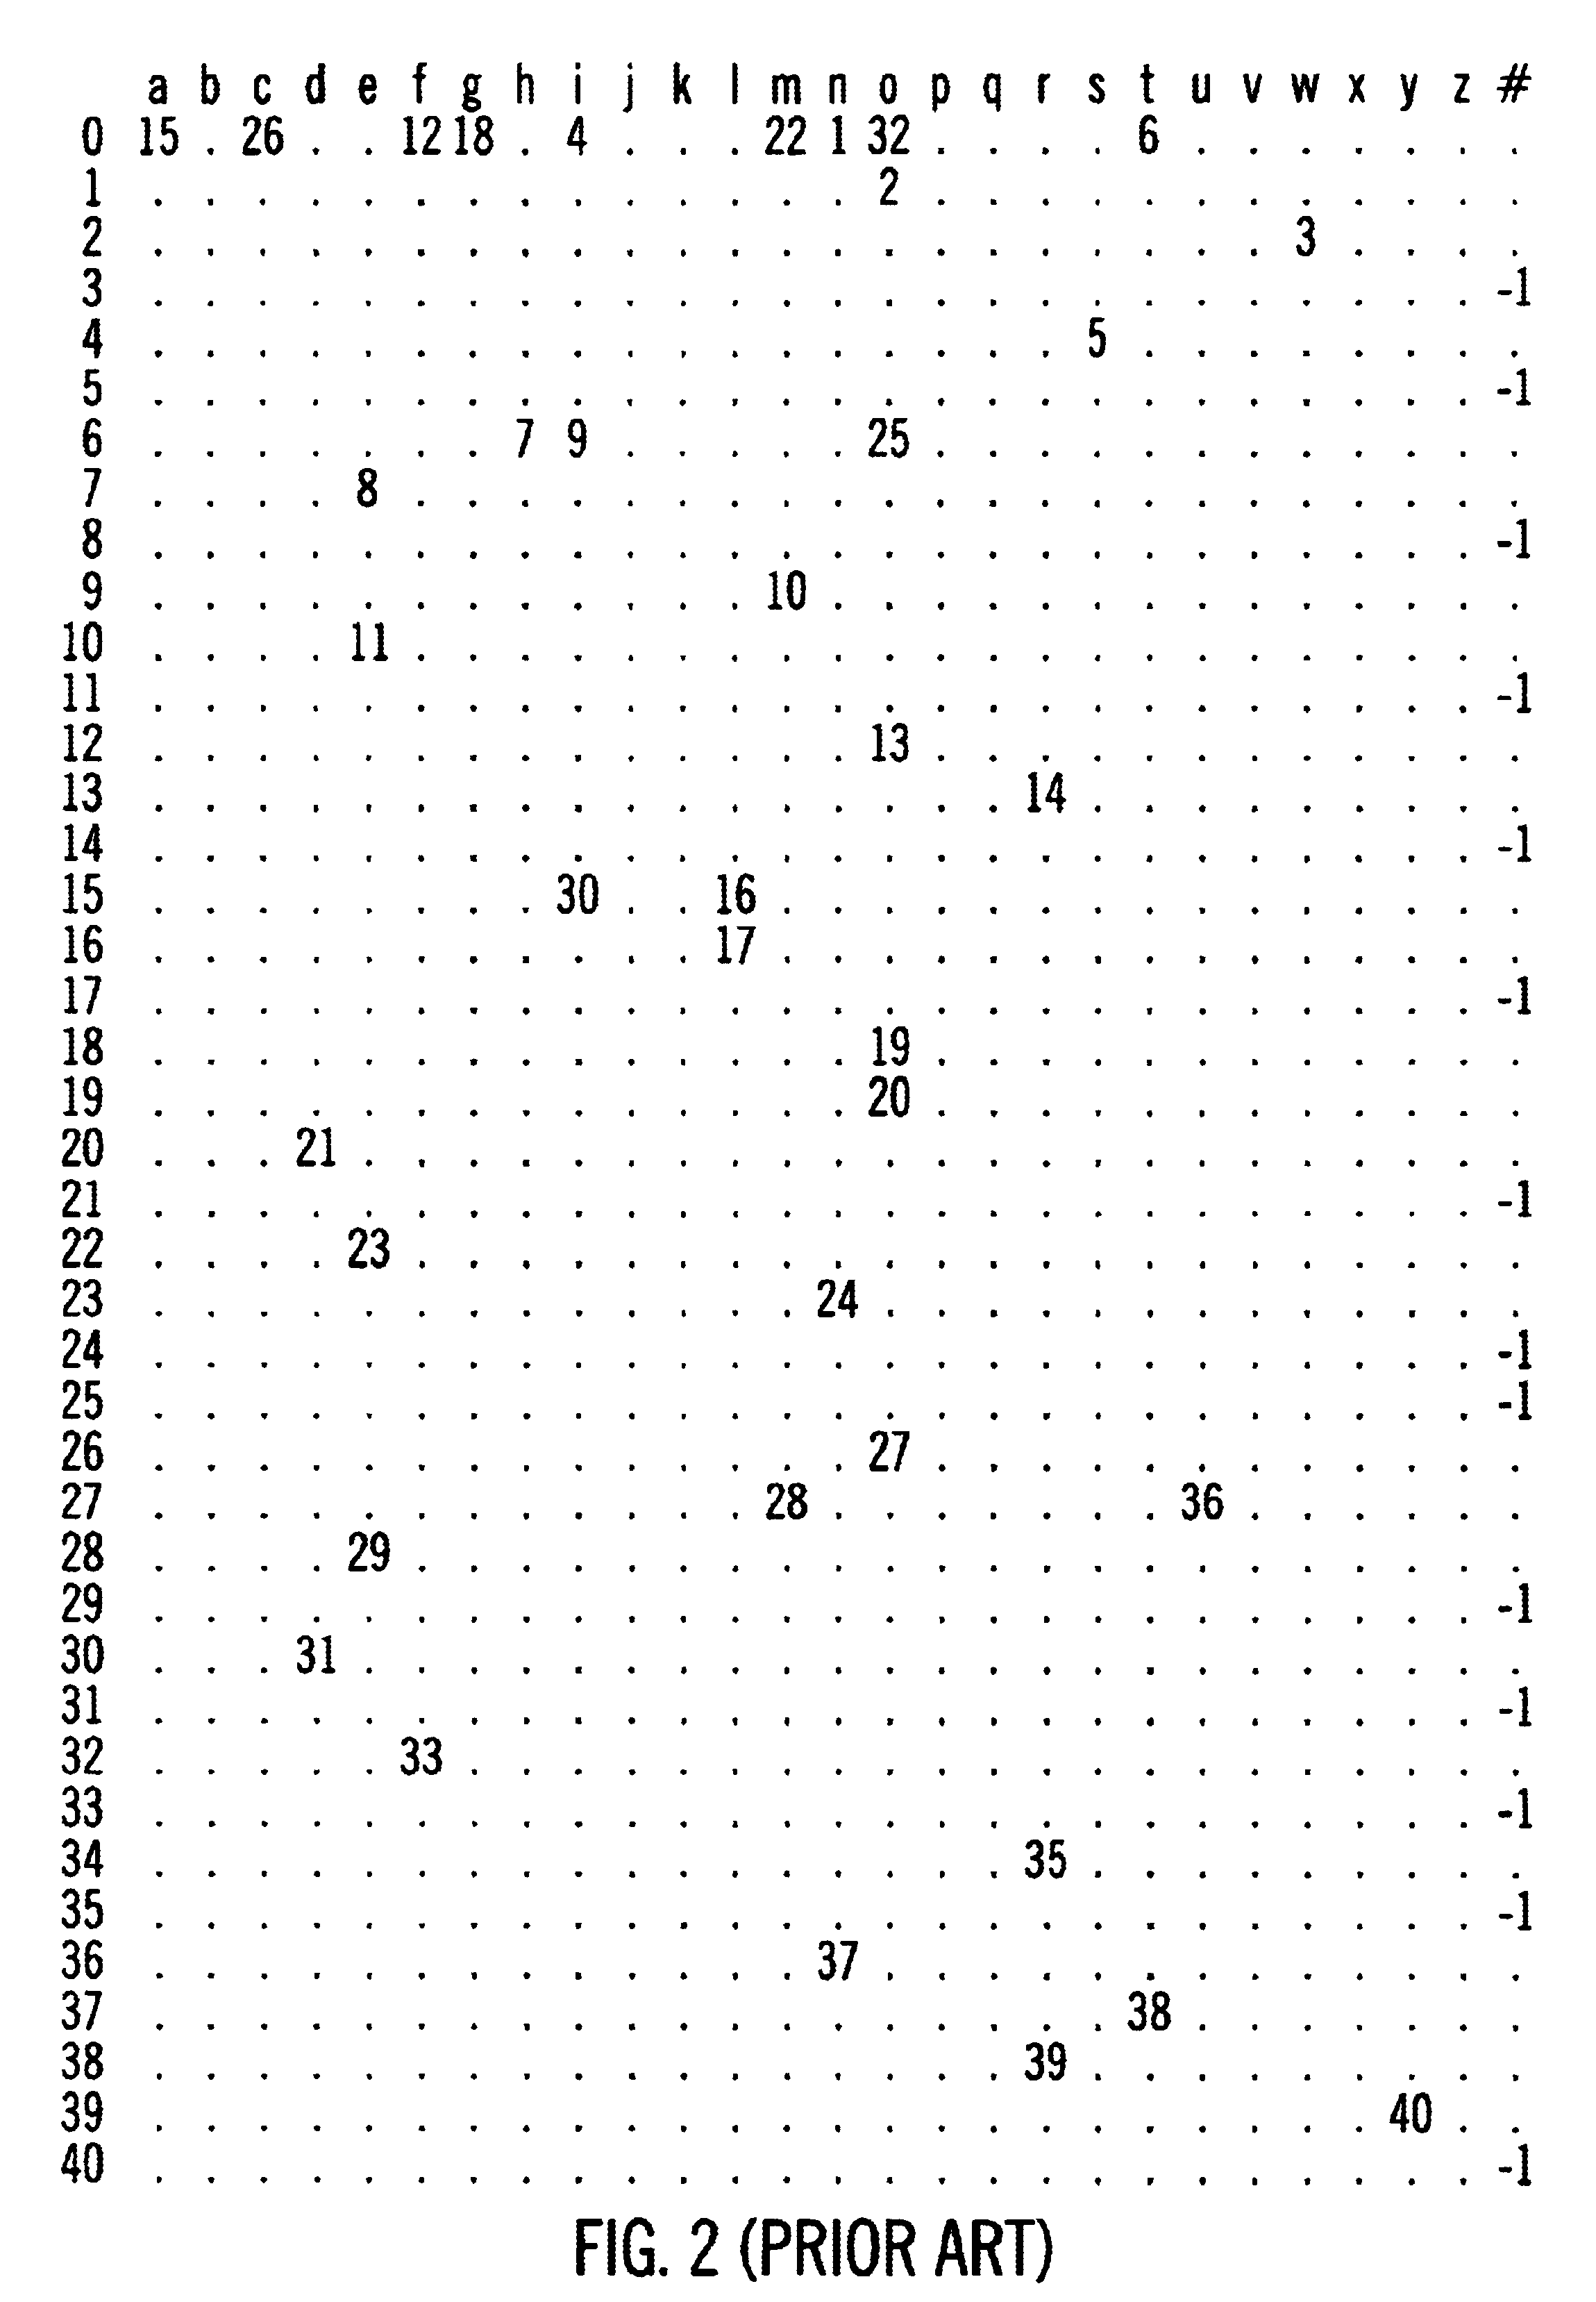 Method, system, and program for determining boundaries in a string using a dictionary